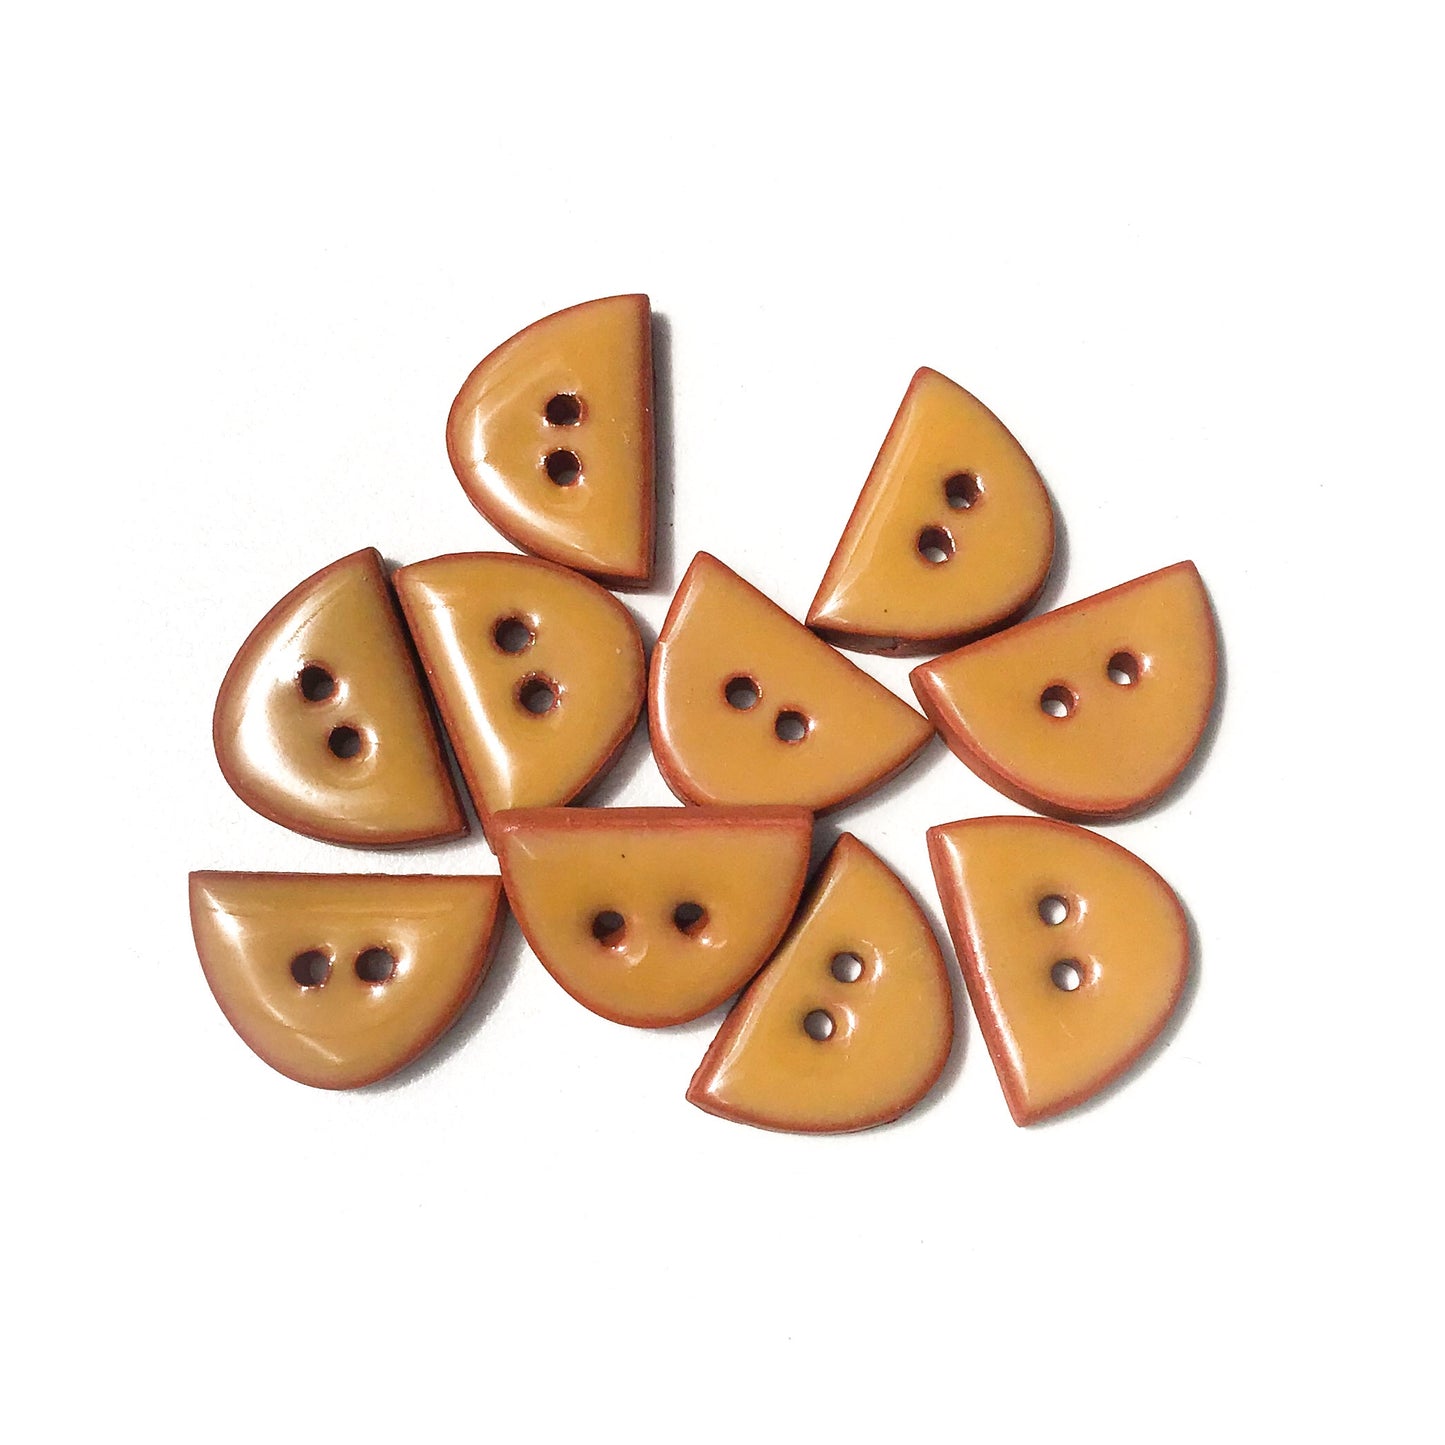 Camel Brown Ceramic Buttons - Small Half Circle Clay Buttons - 3/8" x 5/8" - 10 Pack